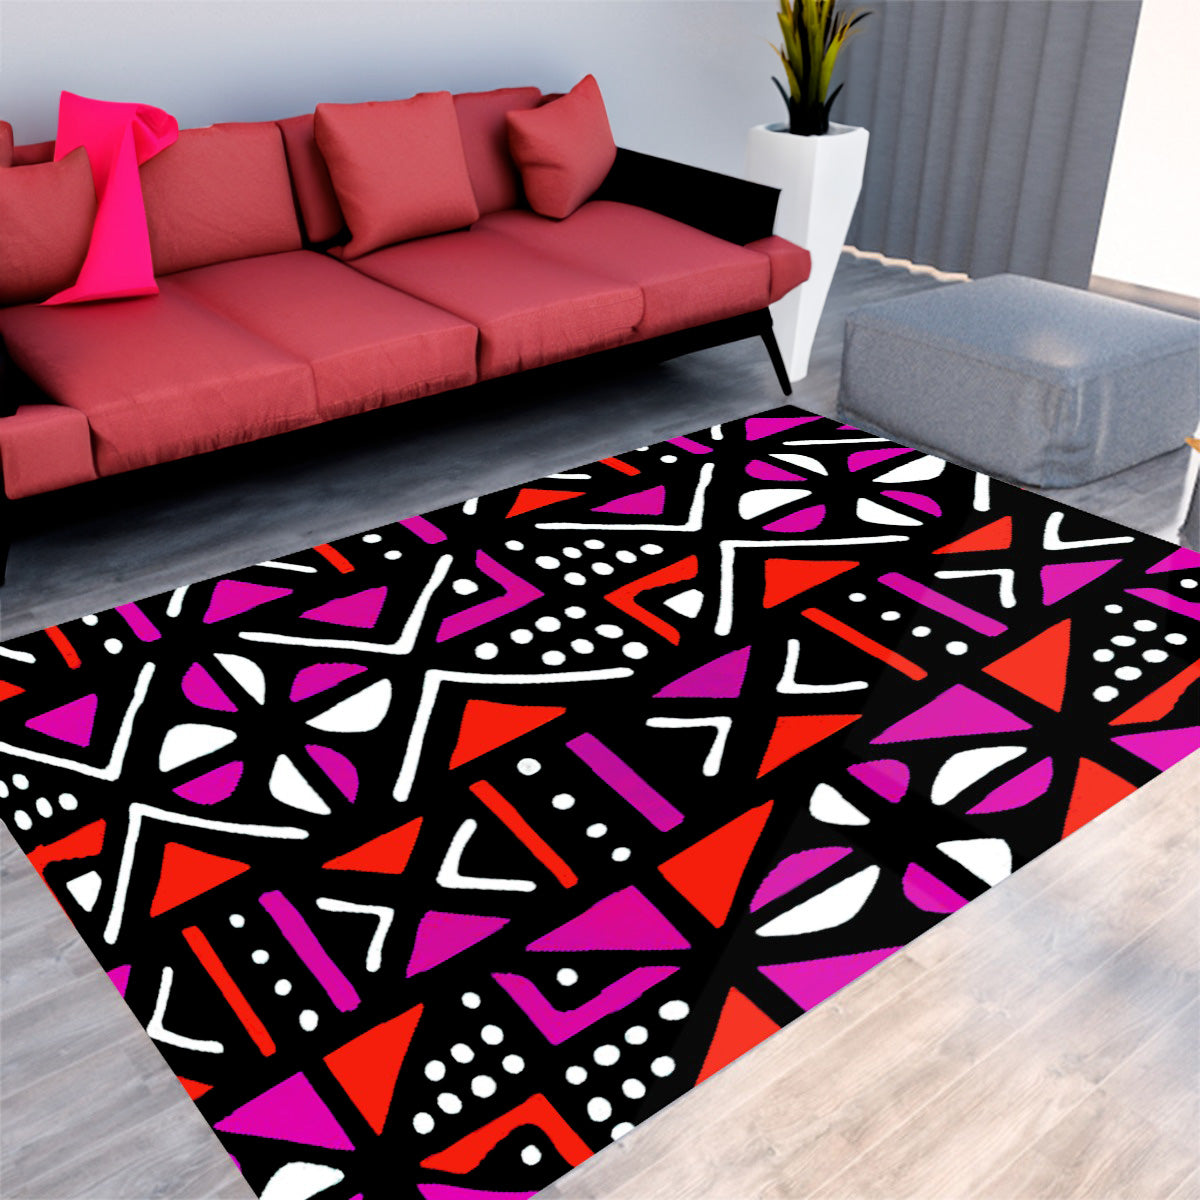 Mudcloth African Carpet Rug: Timeless Tribal Floor Accent